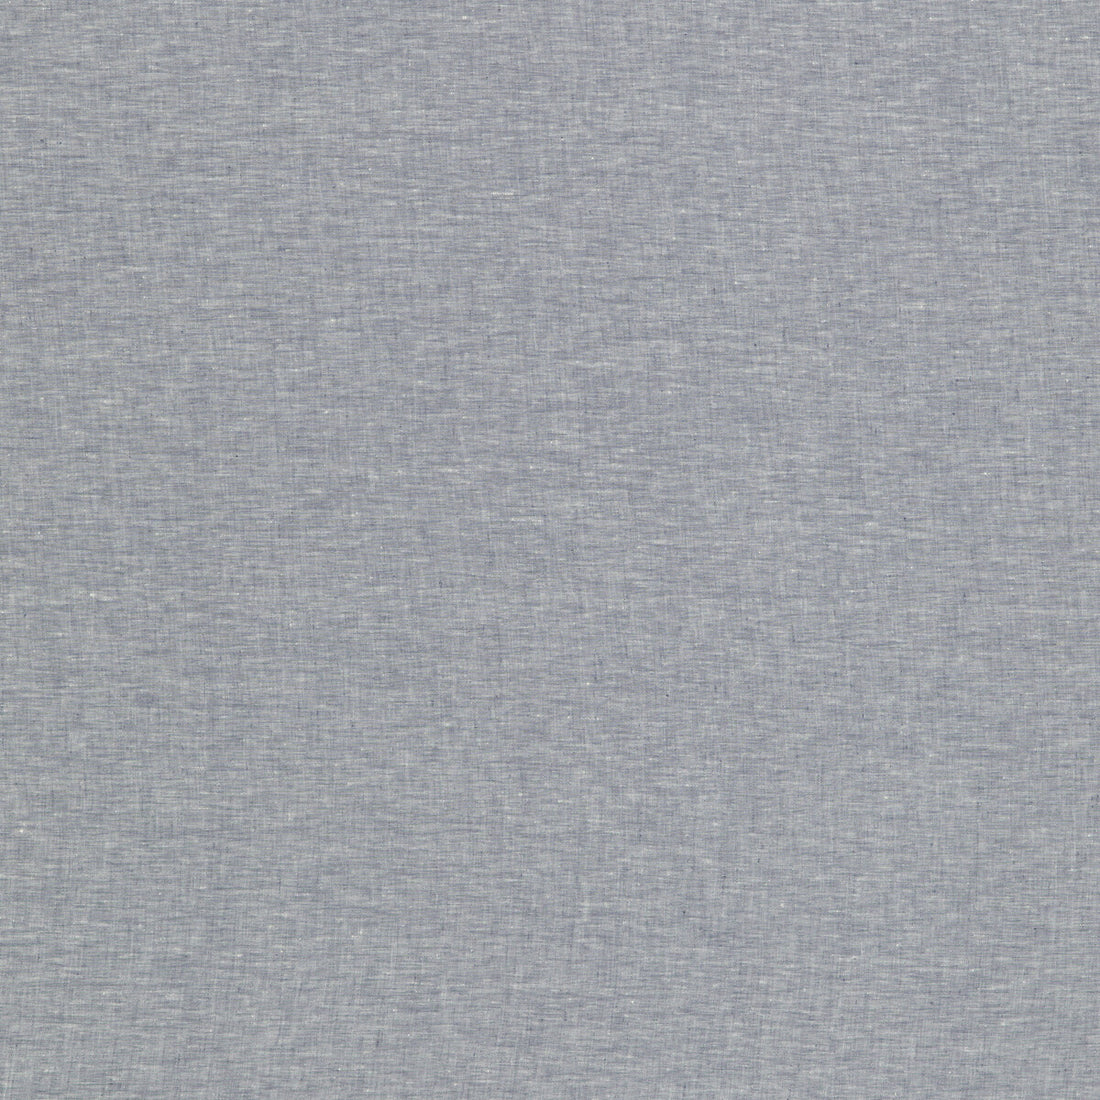 Nala Linen fabric in denim color - pattern ED85329.640.0 - by Threads in the Nala Linens collection